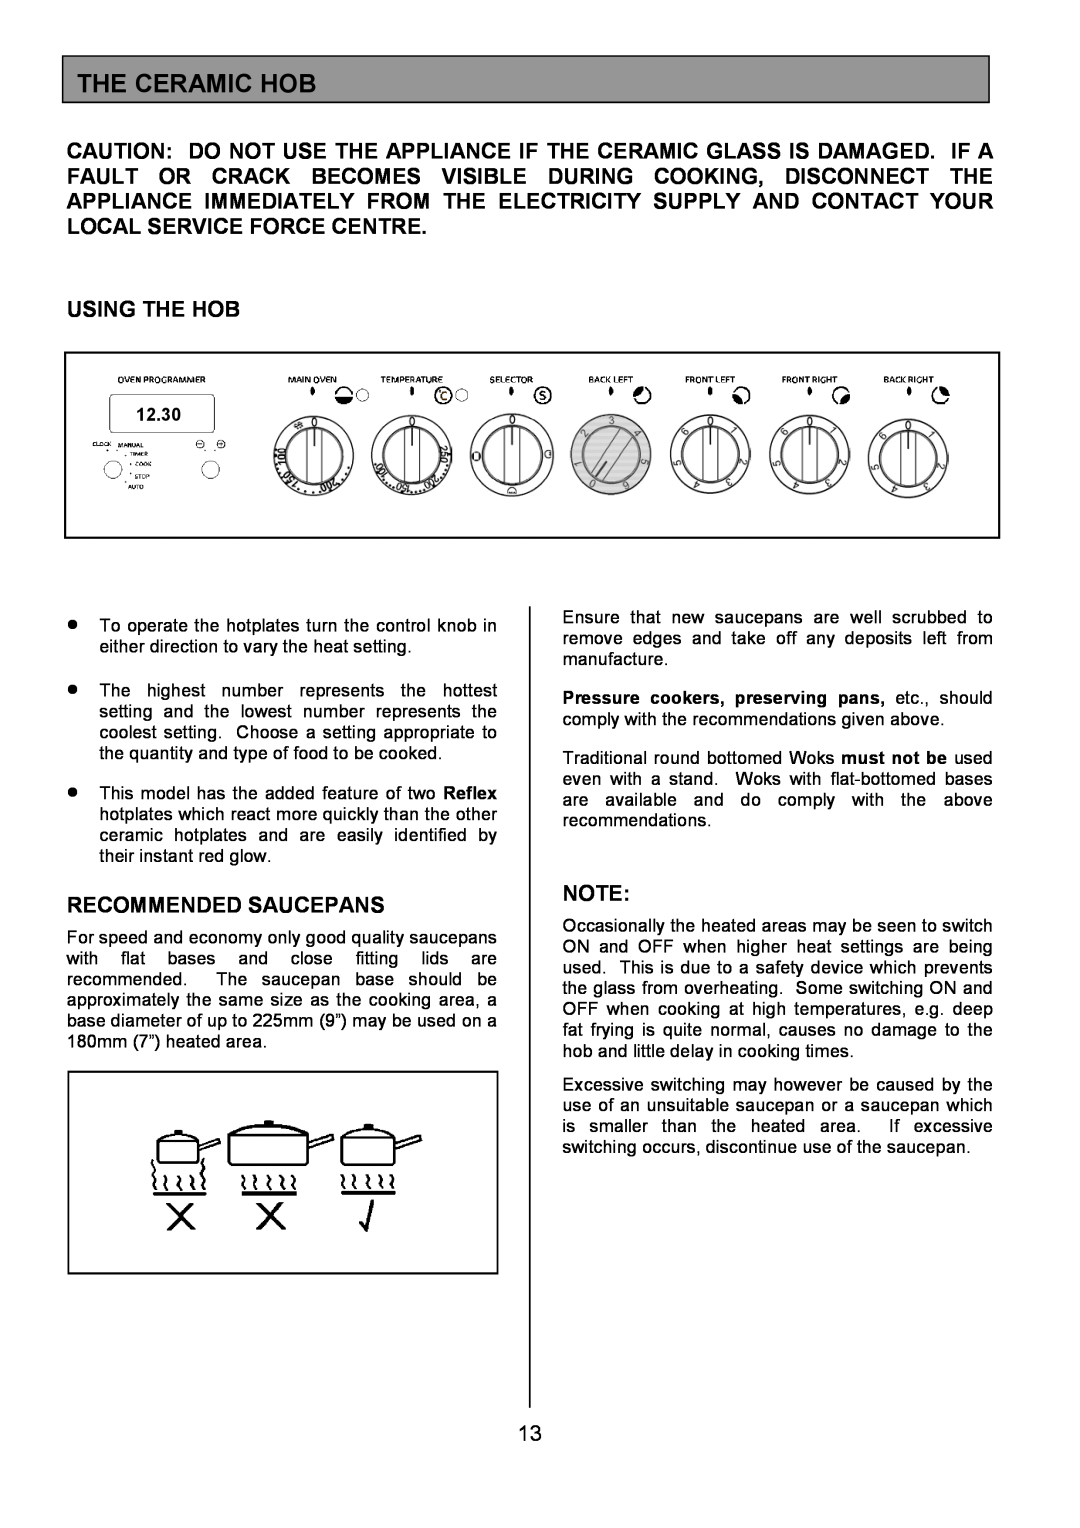 Tricity Bendix SB463 installation instructions The Ceramic Hob, Using The Hob, Recommended Saucepans, 12.30 